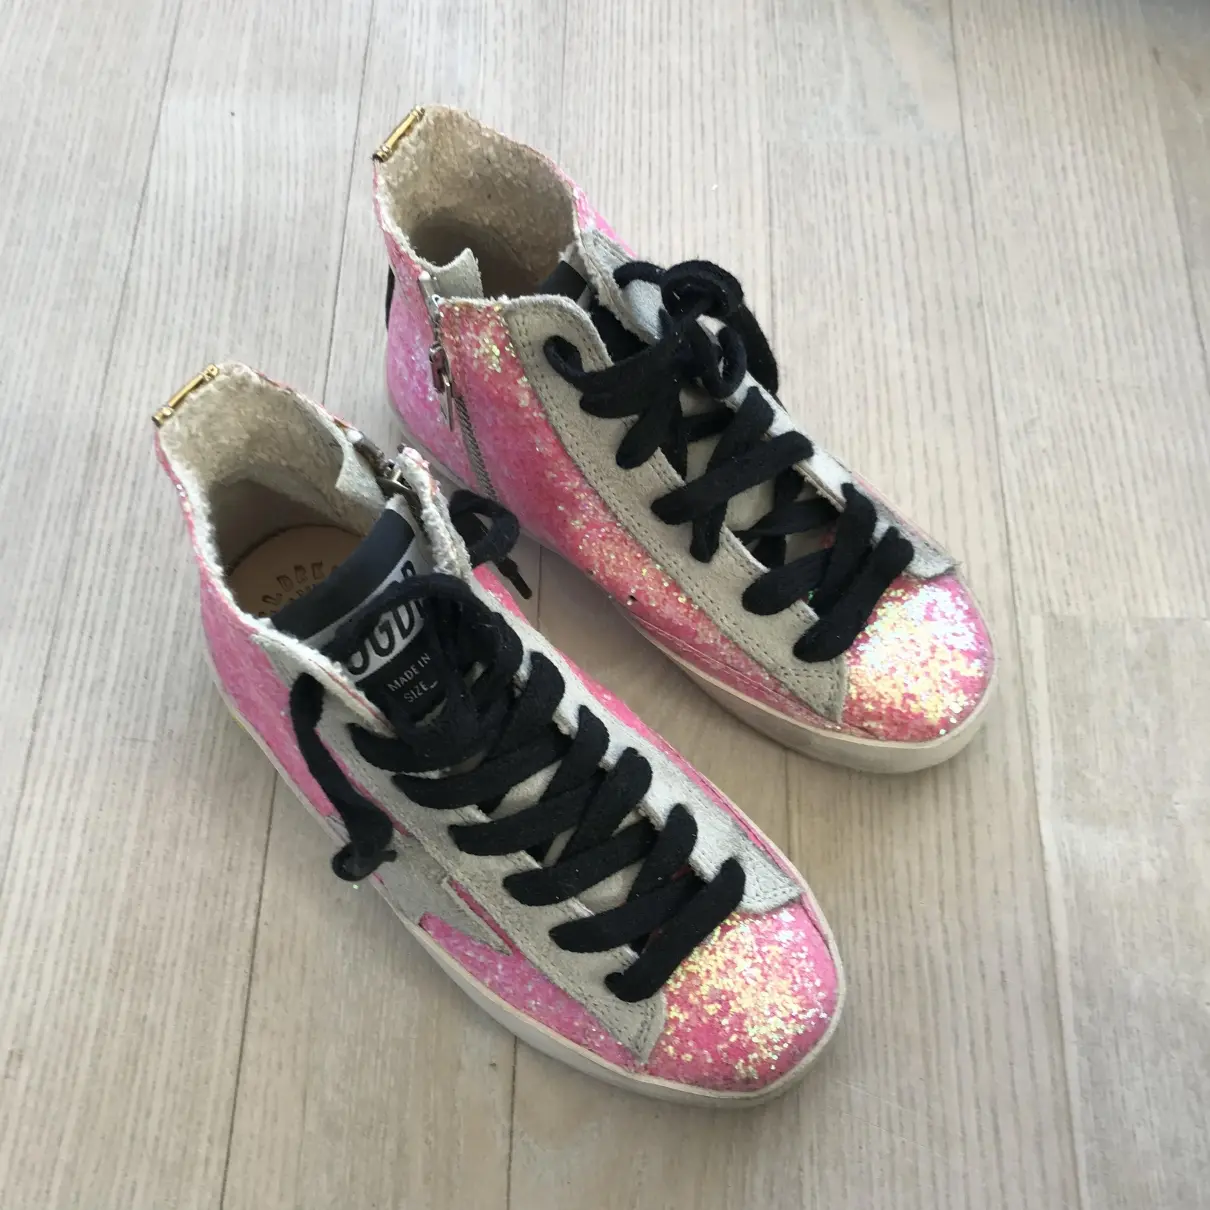 Golden Goose Hi Star leather trainers for sale